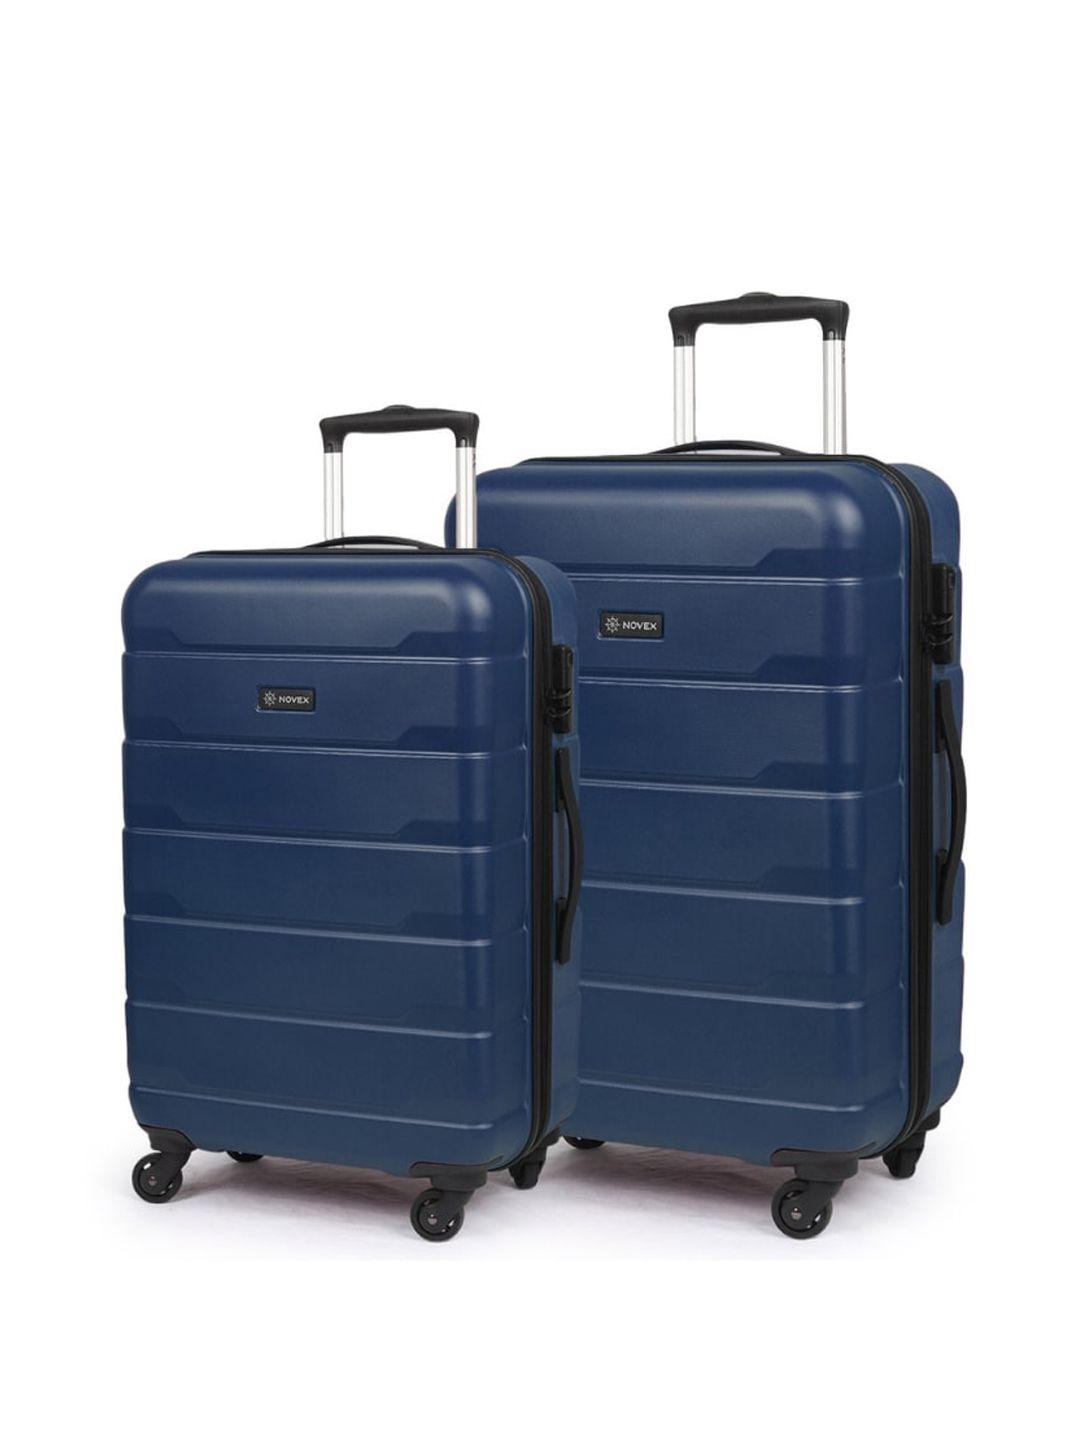 novex unisex set of 2 blue textured hard-sided trolley suitcases